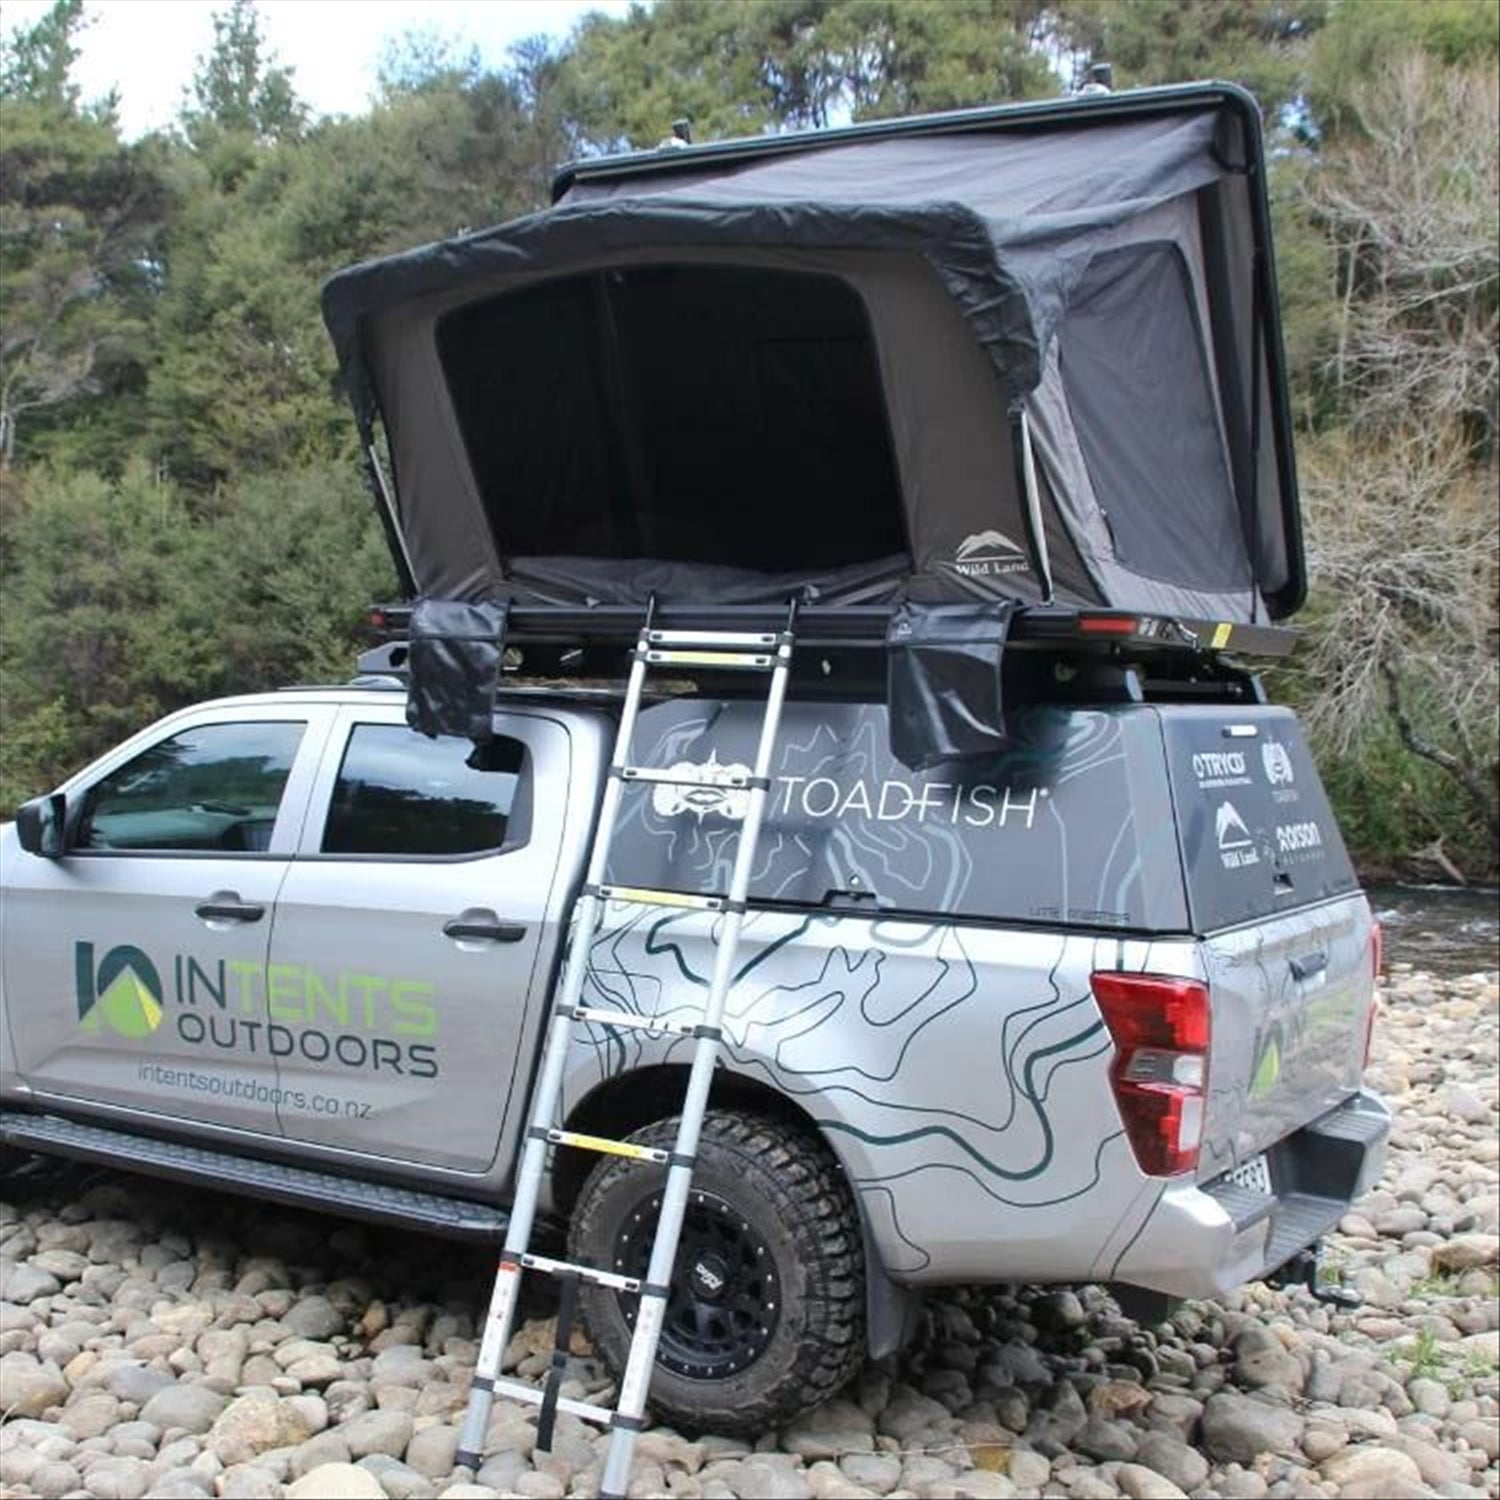 Wild Land Wild Land DC2 Aluminium Hard Shell Roof Top Tent includes free cargo racks - 120cm or 140cm wide